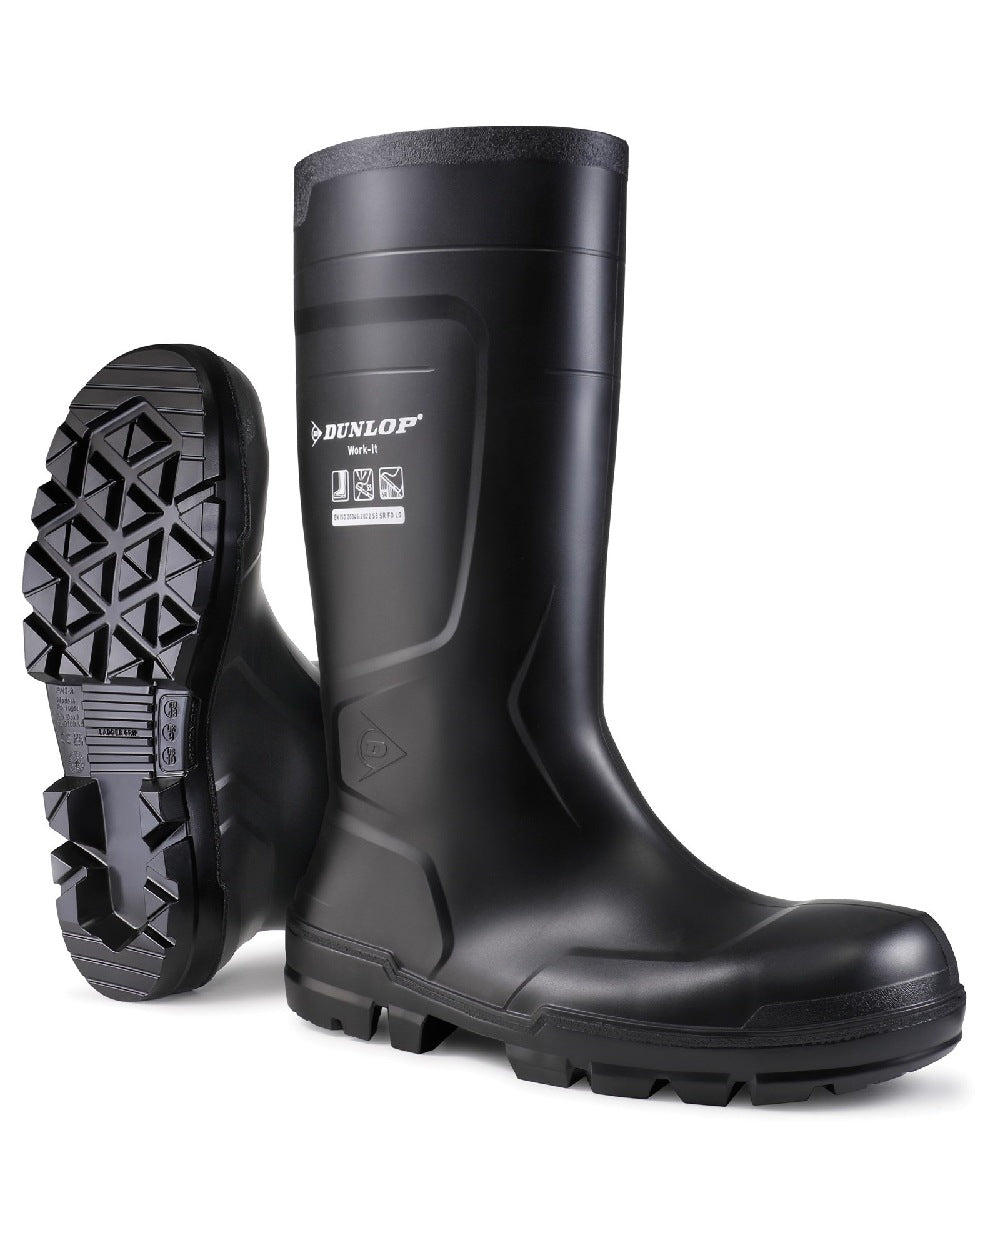 Black coloured Dunlop Work-It Full Safety Wellingtons on white background 